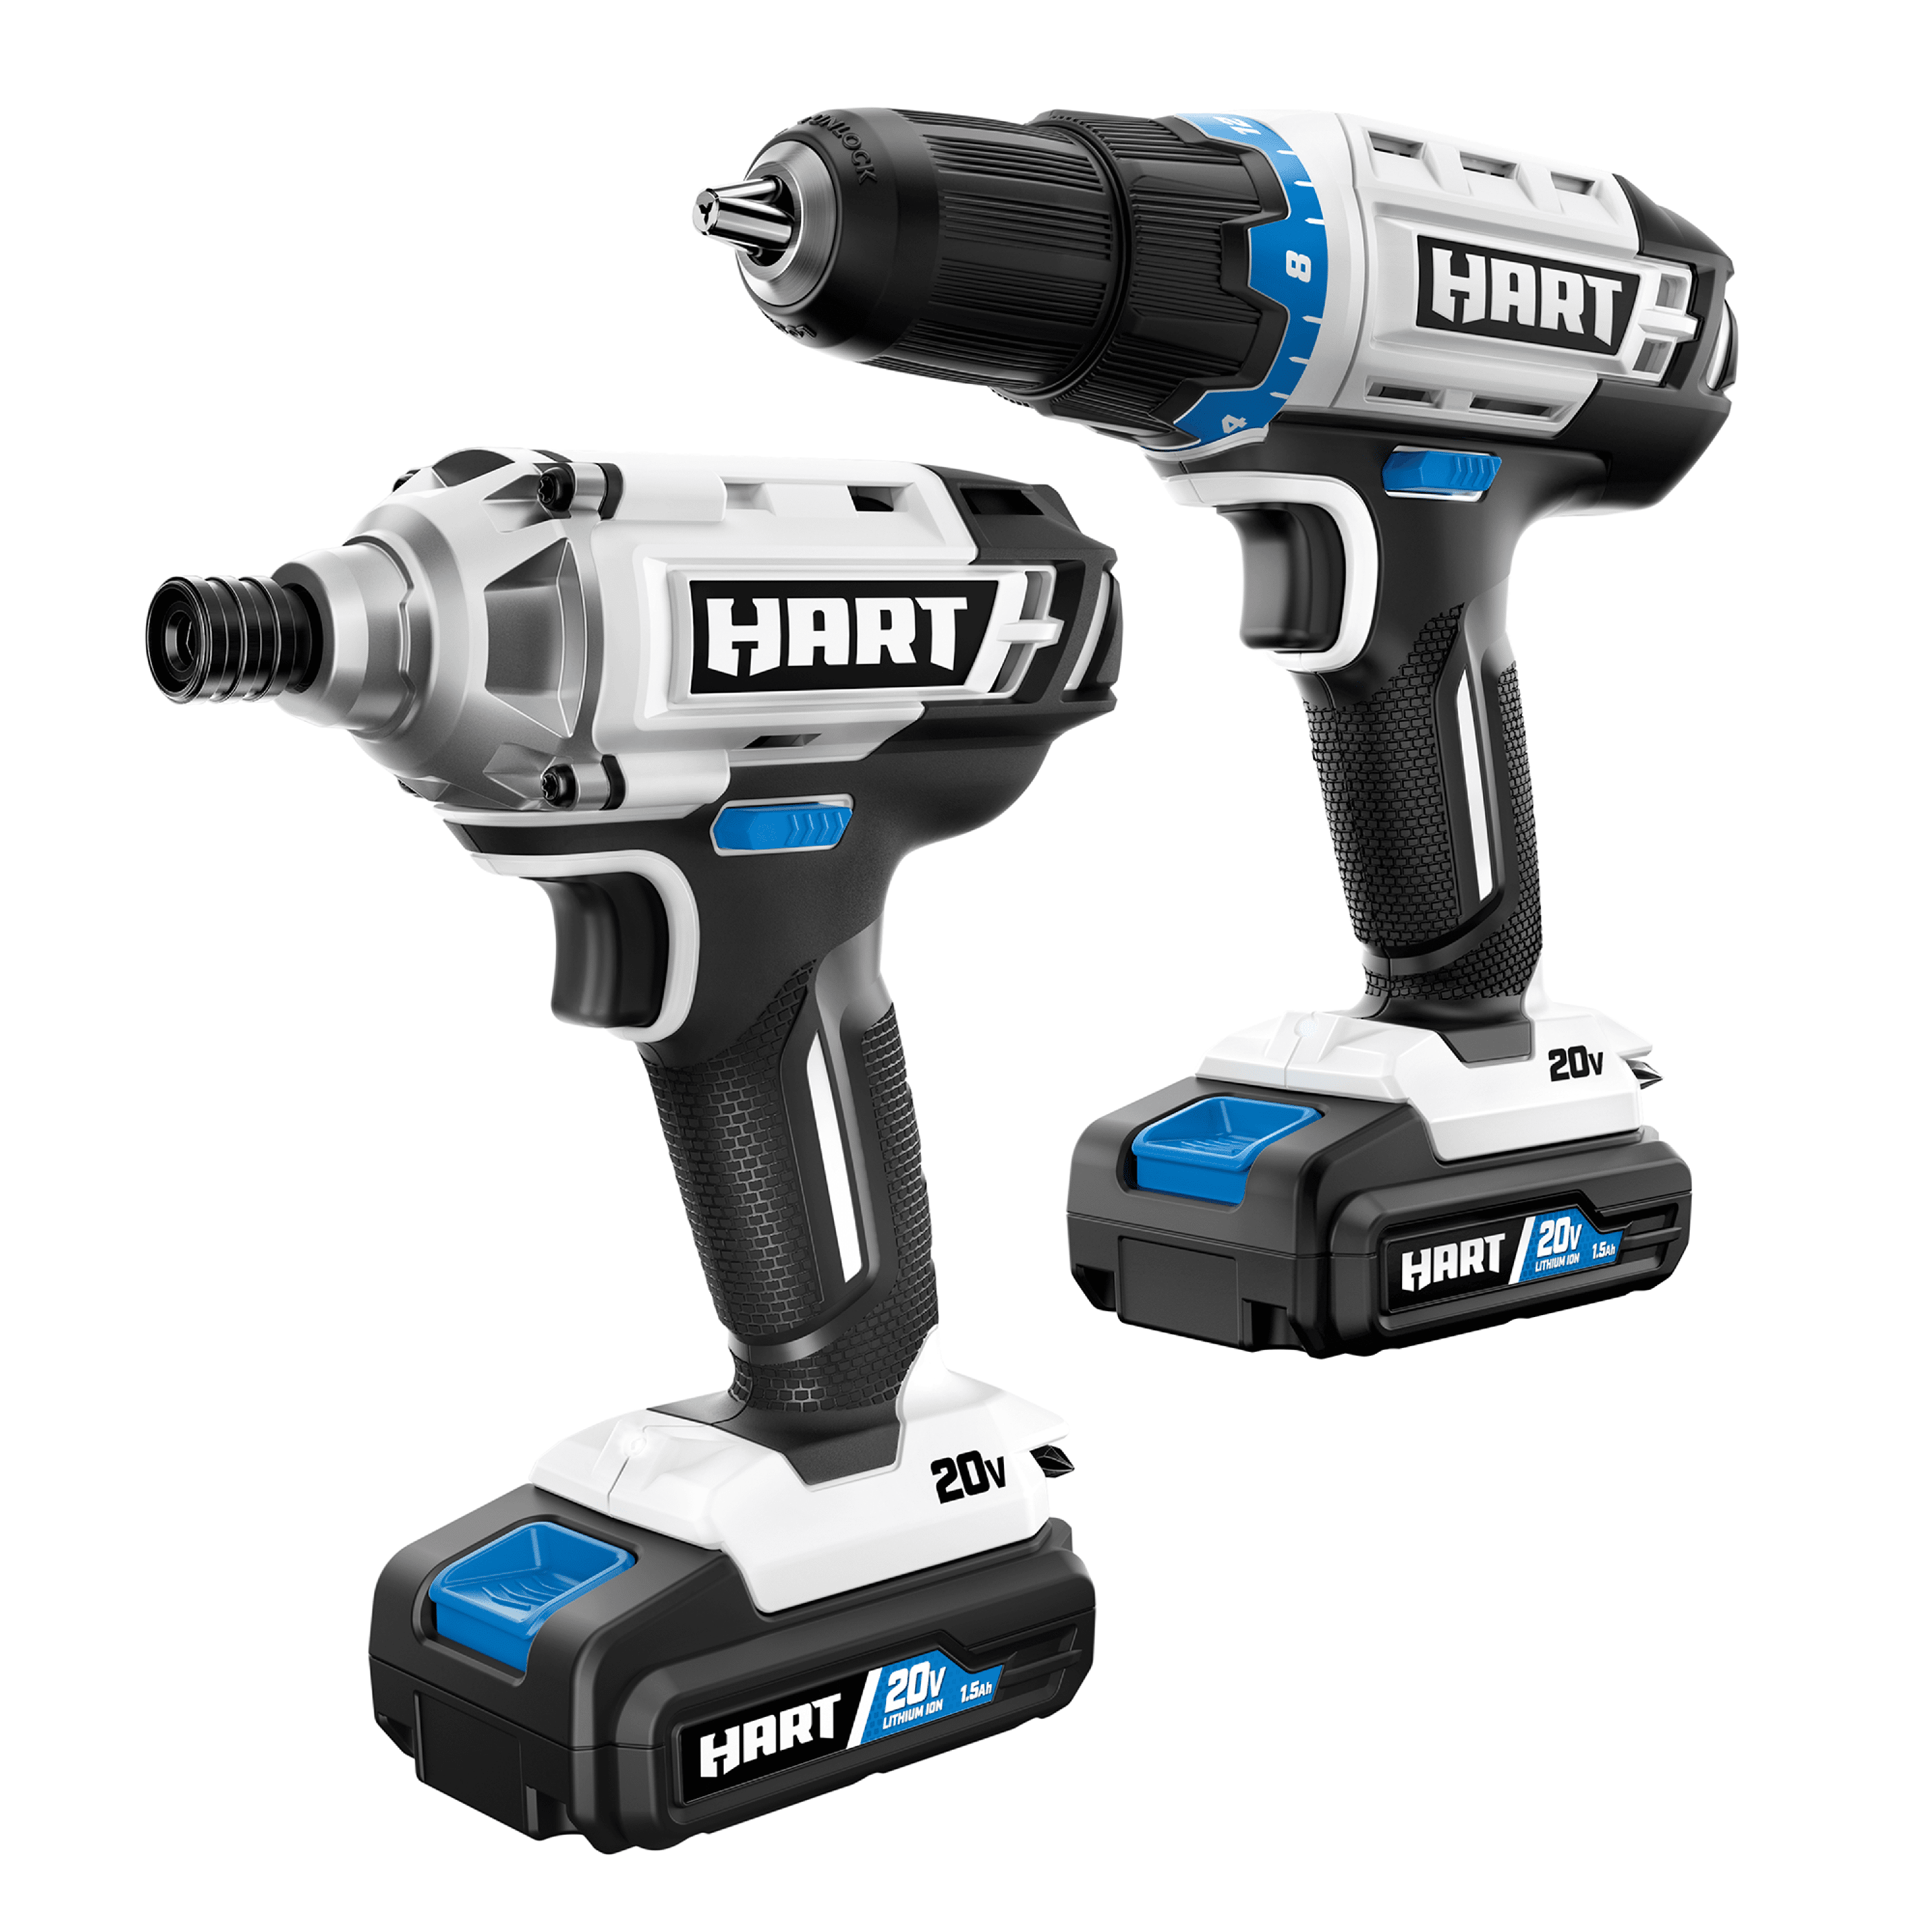 HART 20-Volt Cordless Drill & Impact Combo Kit with (2) Batteries & Charger